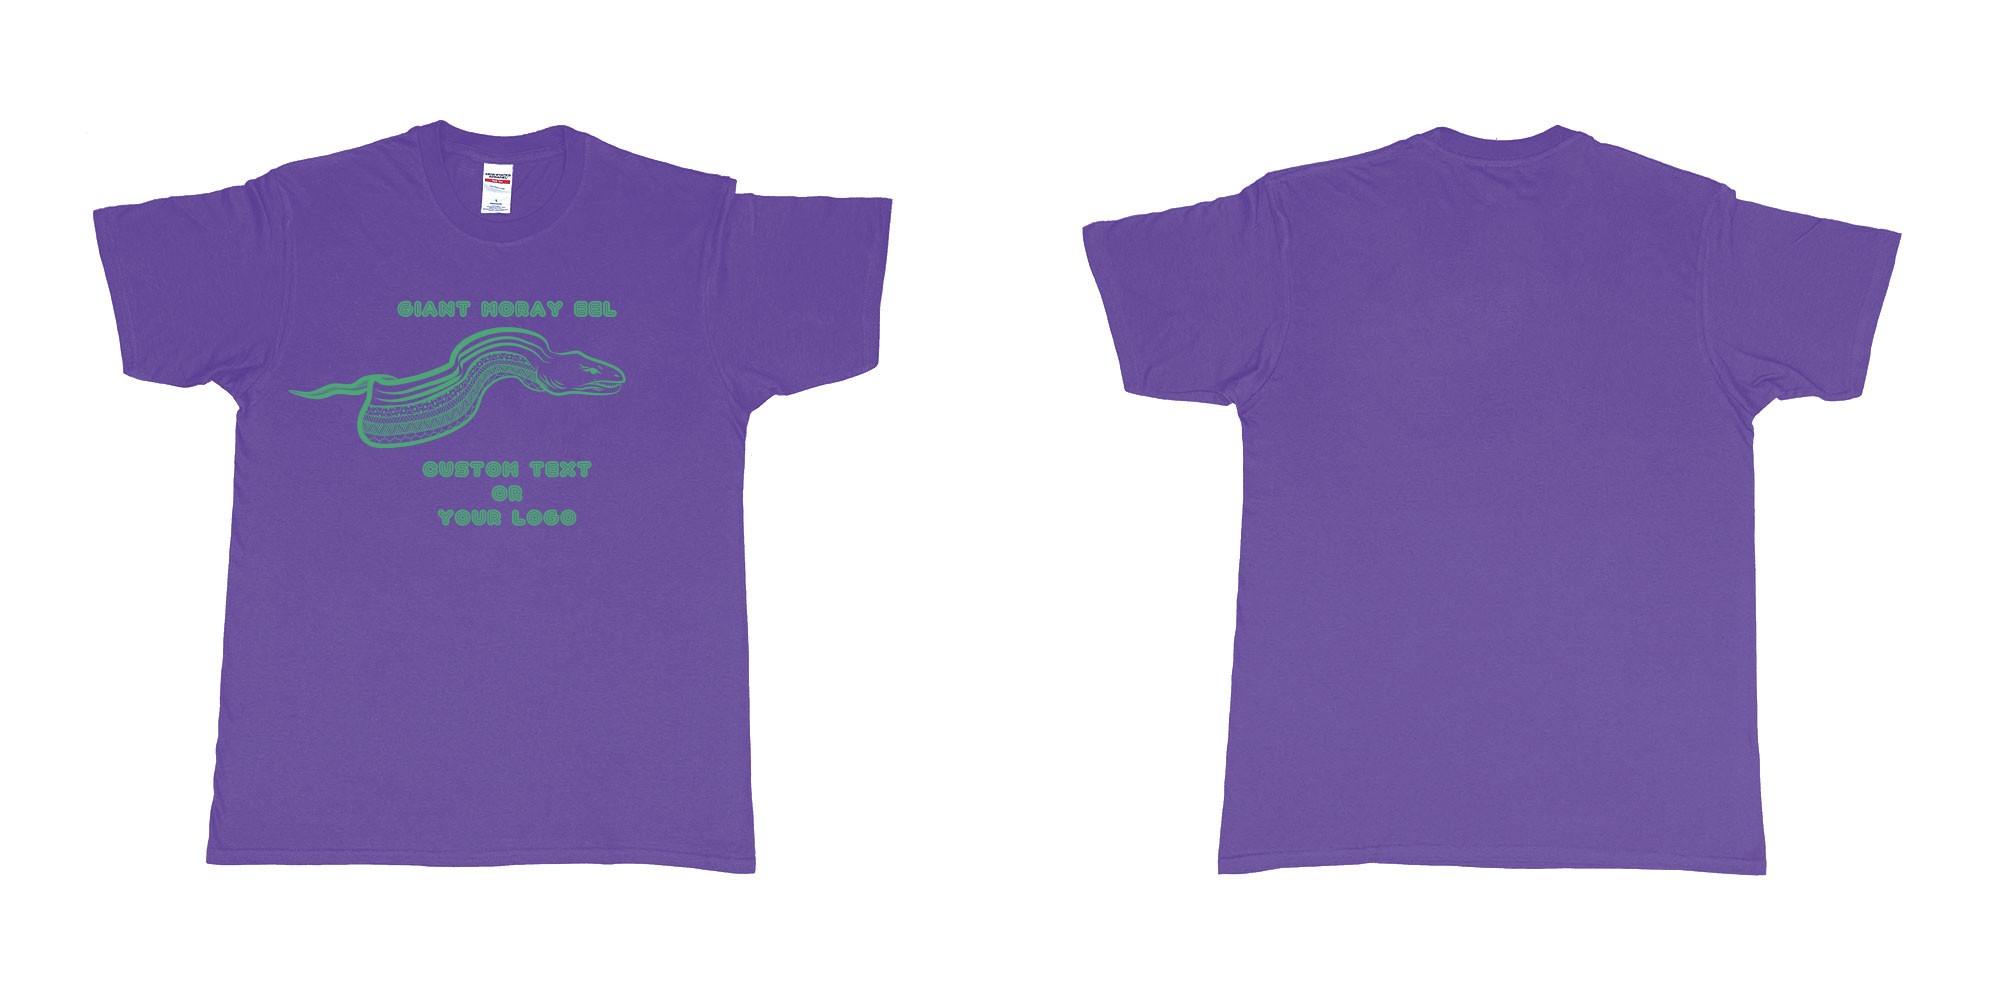 Custom tshirt design giant moray eel tribal in fabric color purple choice your own text made in Bali by The Pirate Way